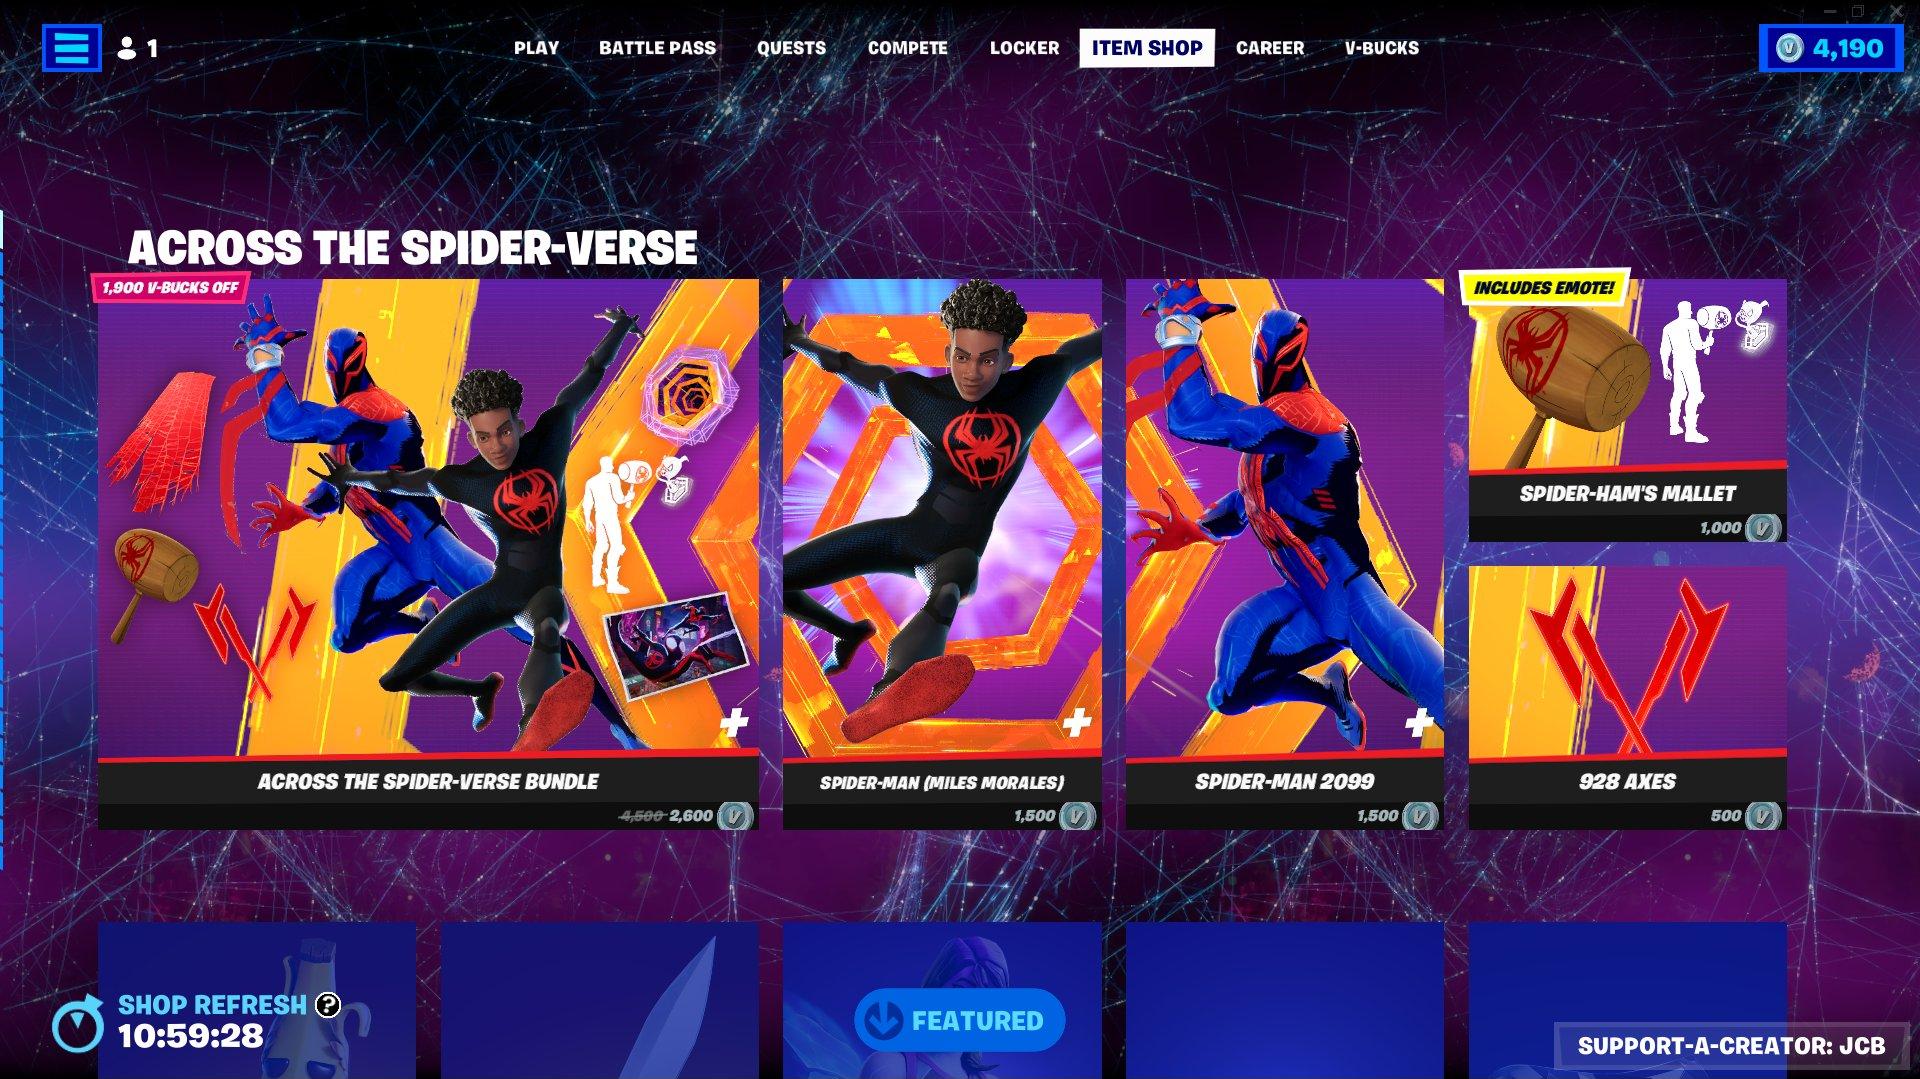 The Spider-Verse Brings Miles Morales and More to Fortnite!